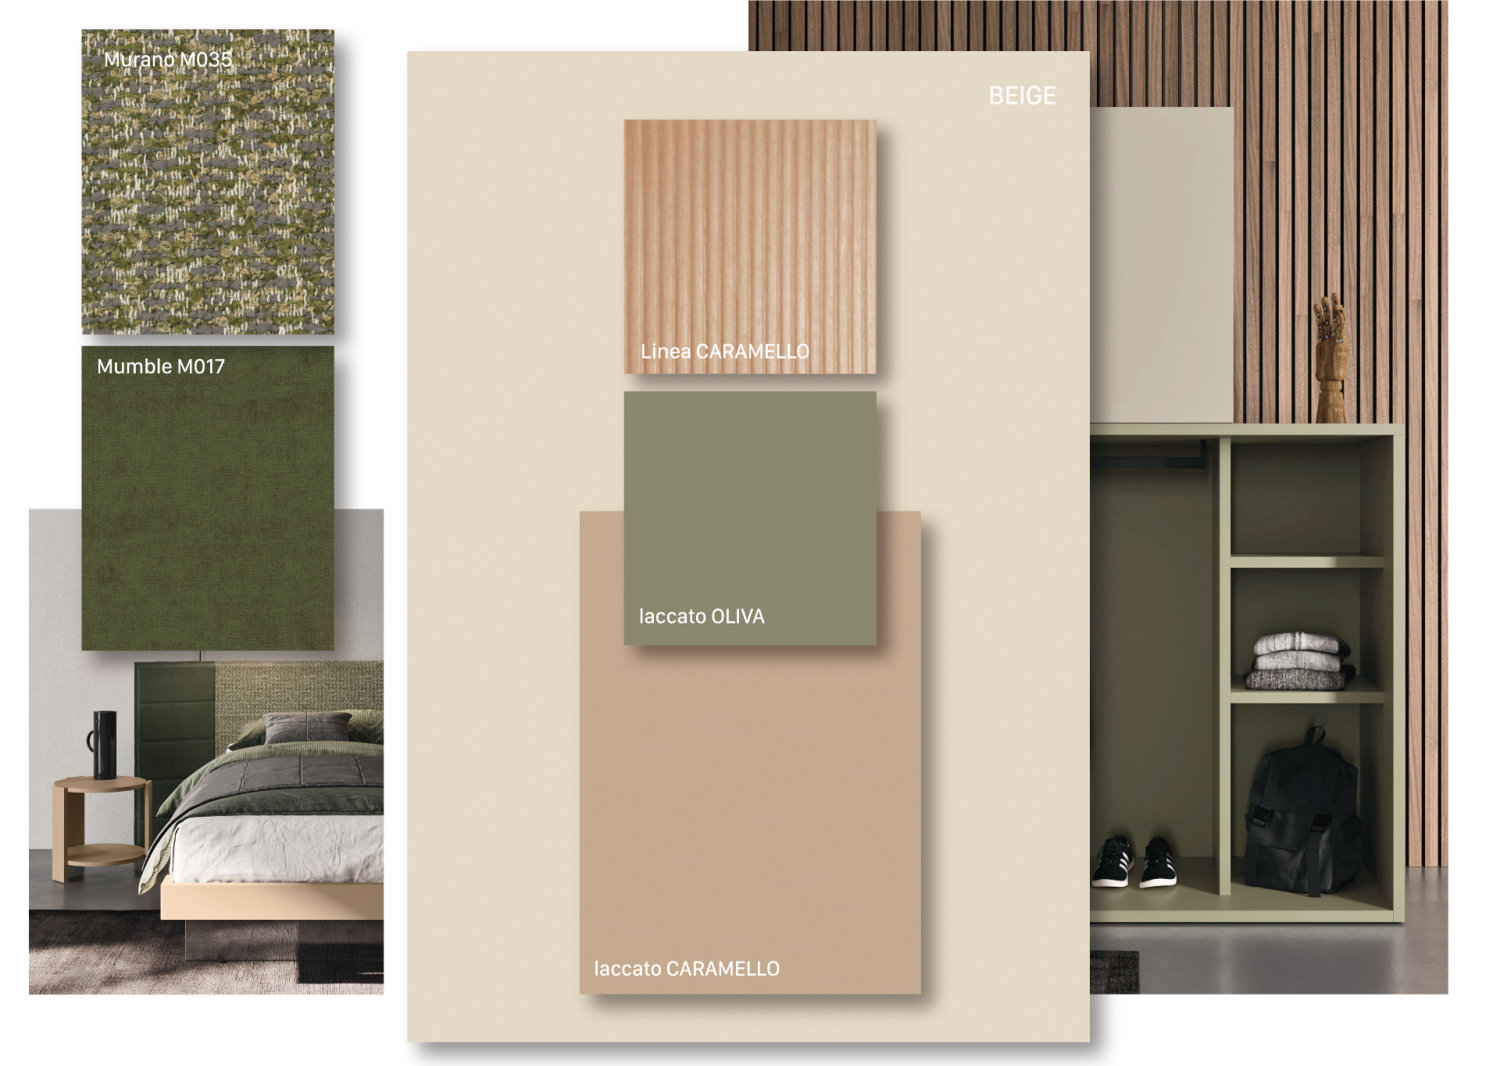 Soft moodboard: beige melamine, caramel and olive lacquer, Murano and Mumble fabrics